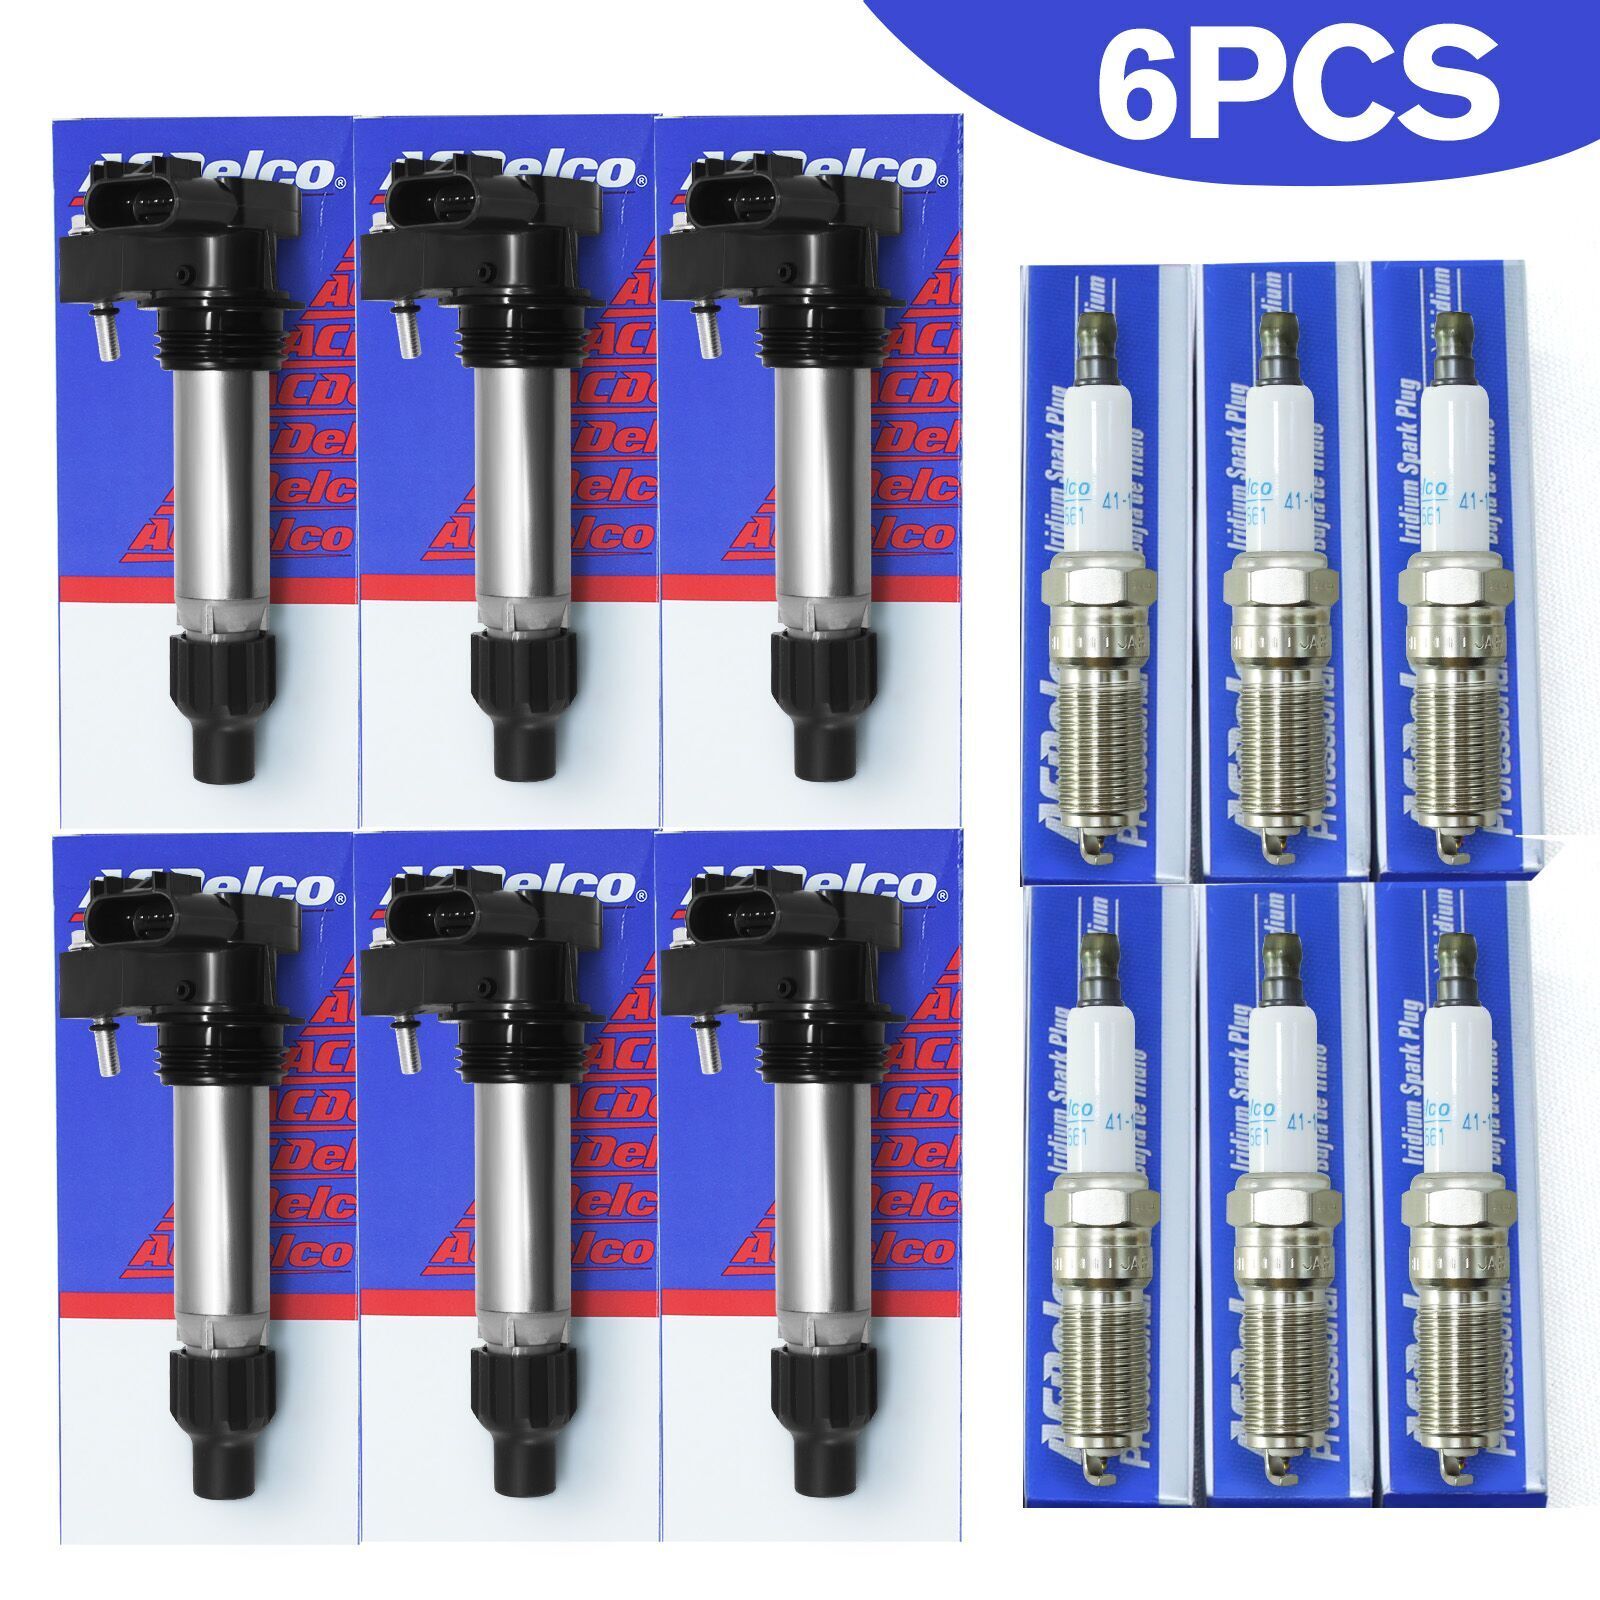 6 Pack 12632479 D515C Ignition Coil & 41-109 Spark Plug For GMC Chevrolet Buick